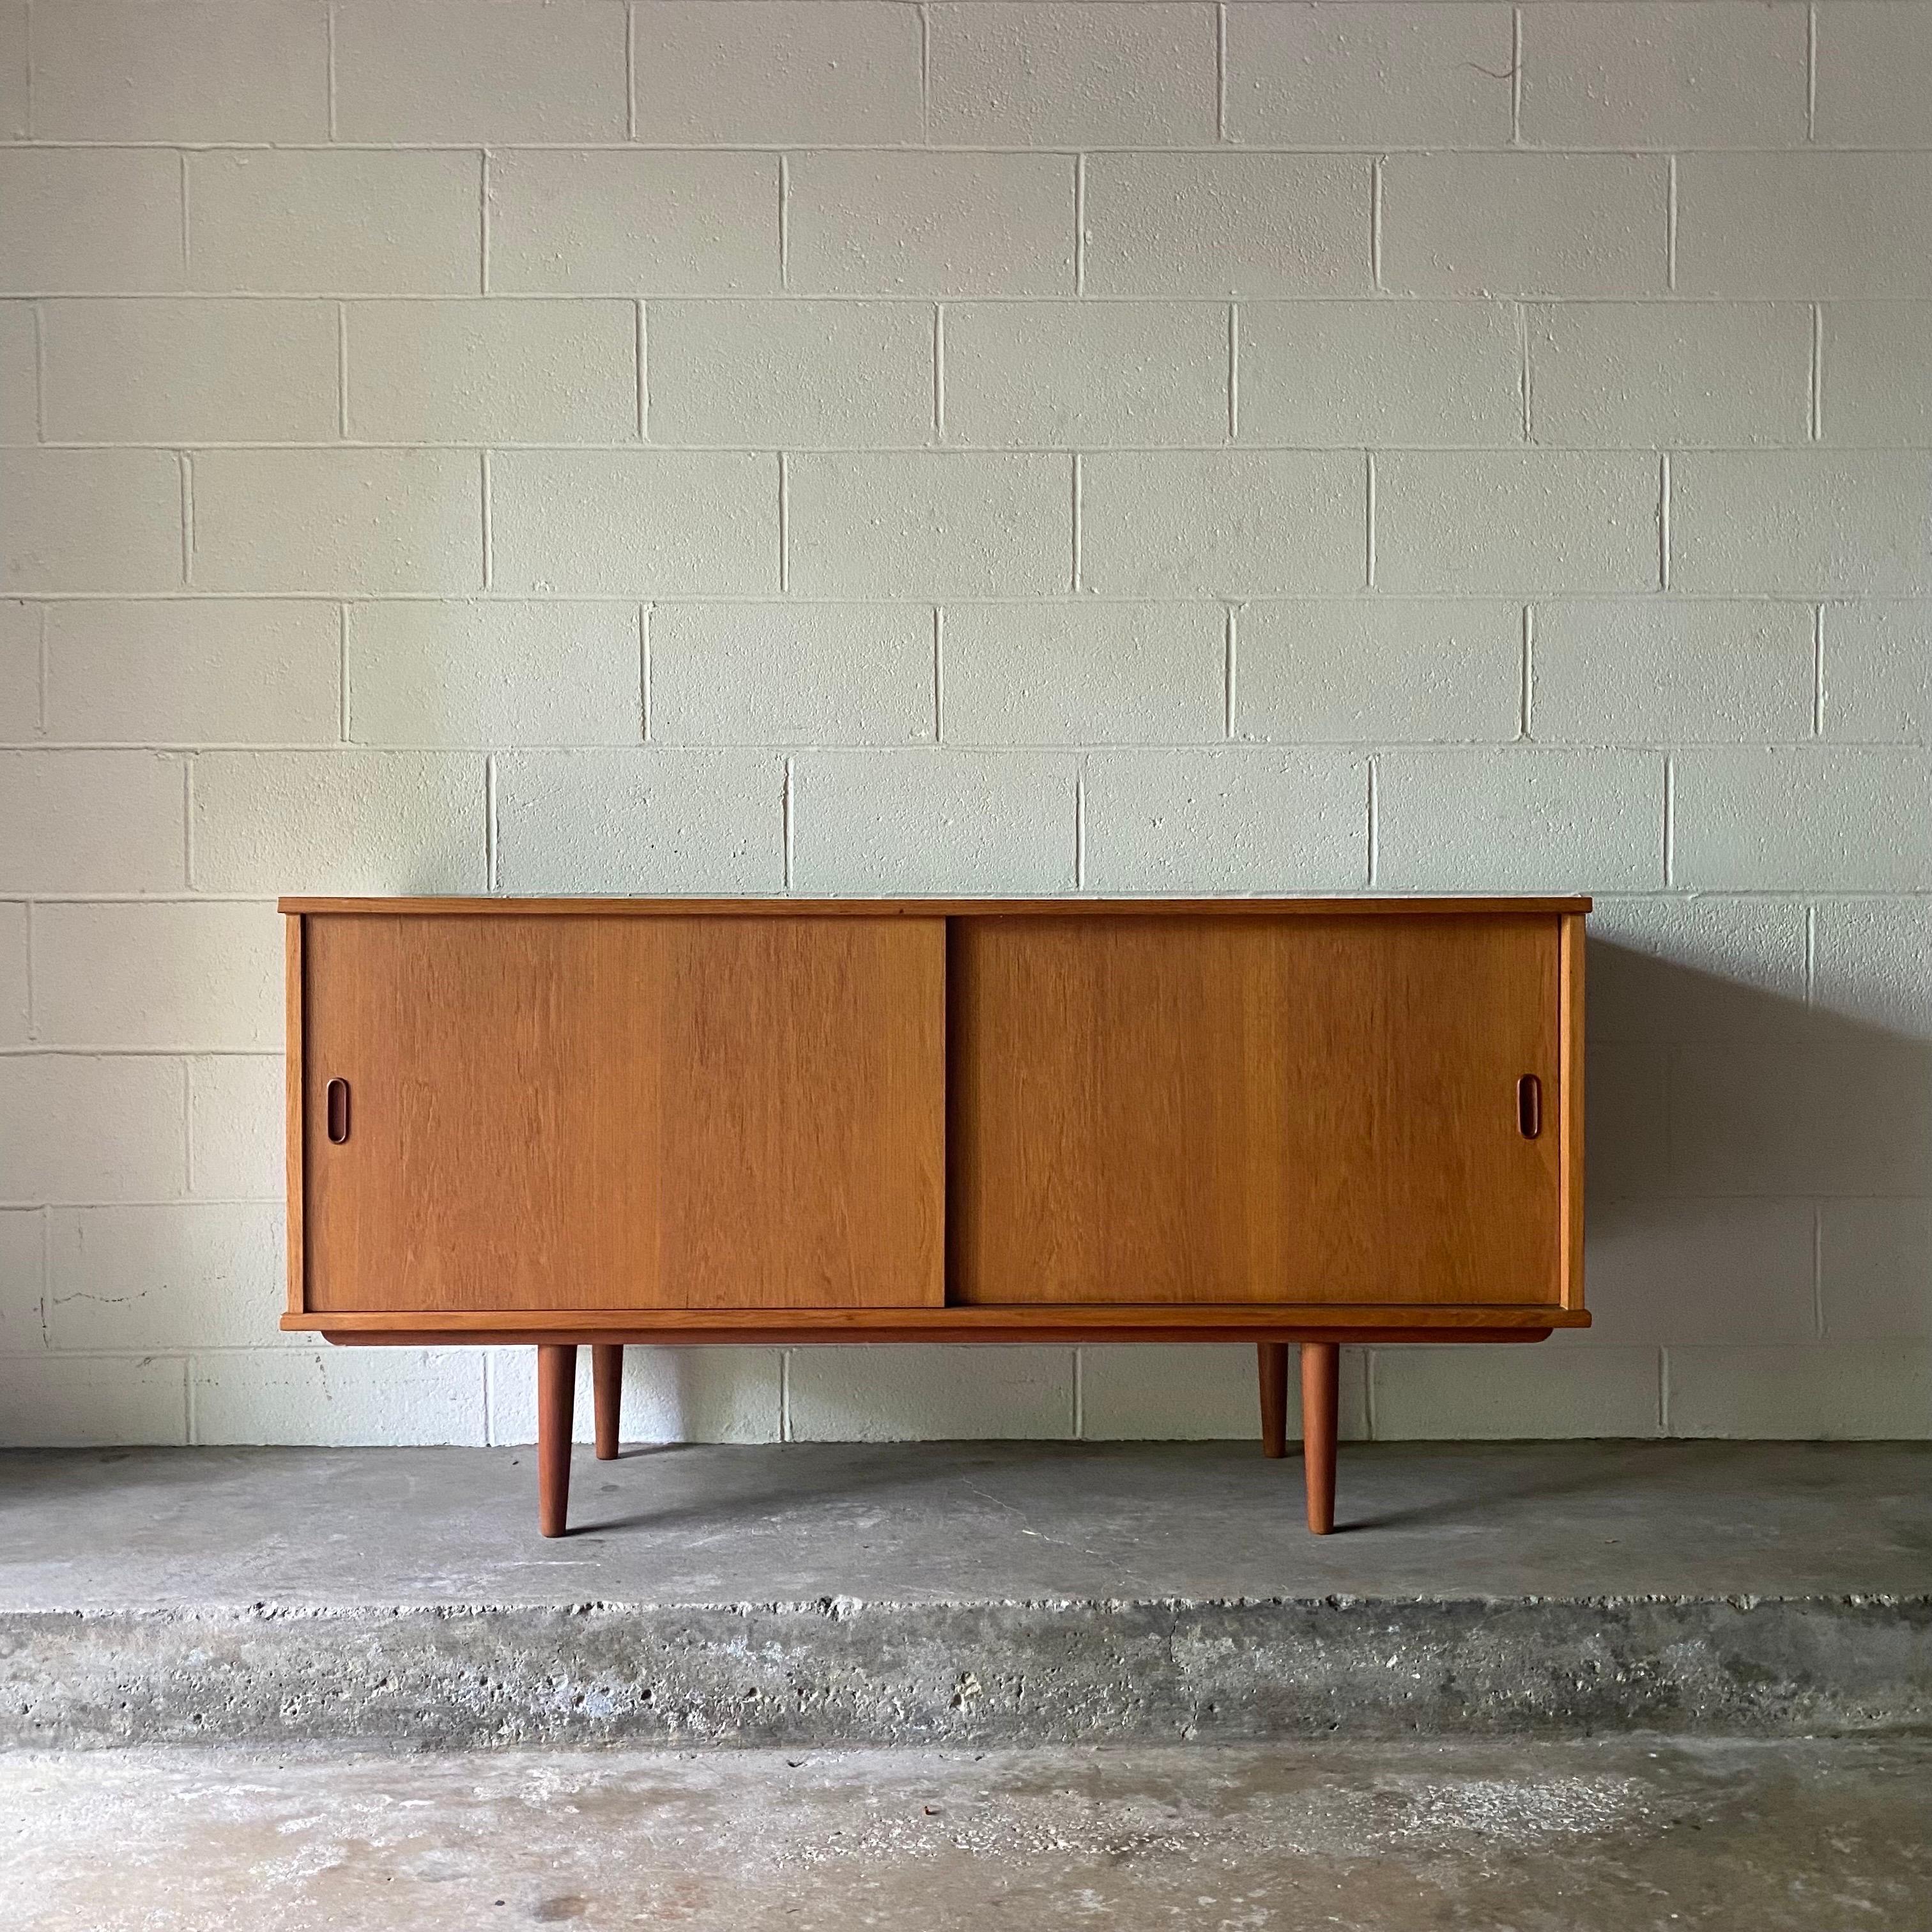 This is an incredible Danish teak sideboard by Dyrlund, ca. 1960’s - made in Denmark. It features two sliding doors with shelves on both sides and a felt-lined drawer for serving ware. 

.